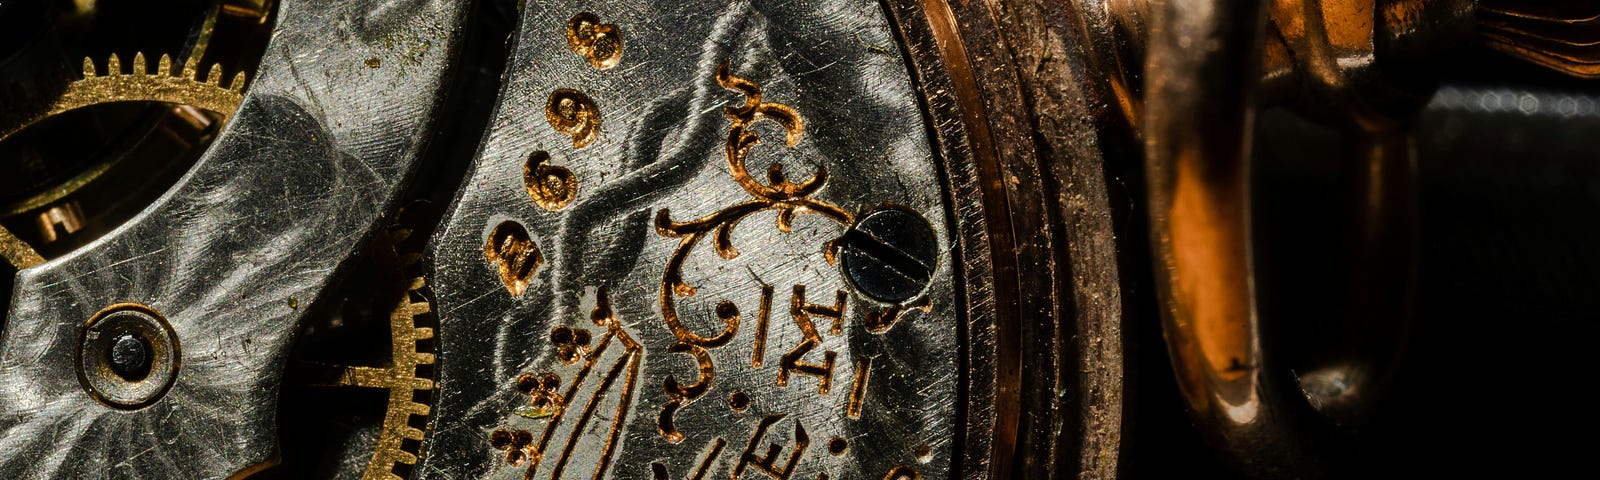 close-up of a detail on an intricate antique pocket watch